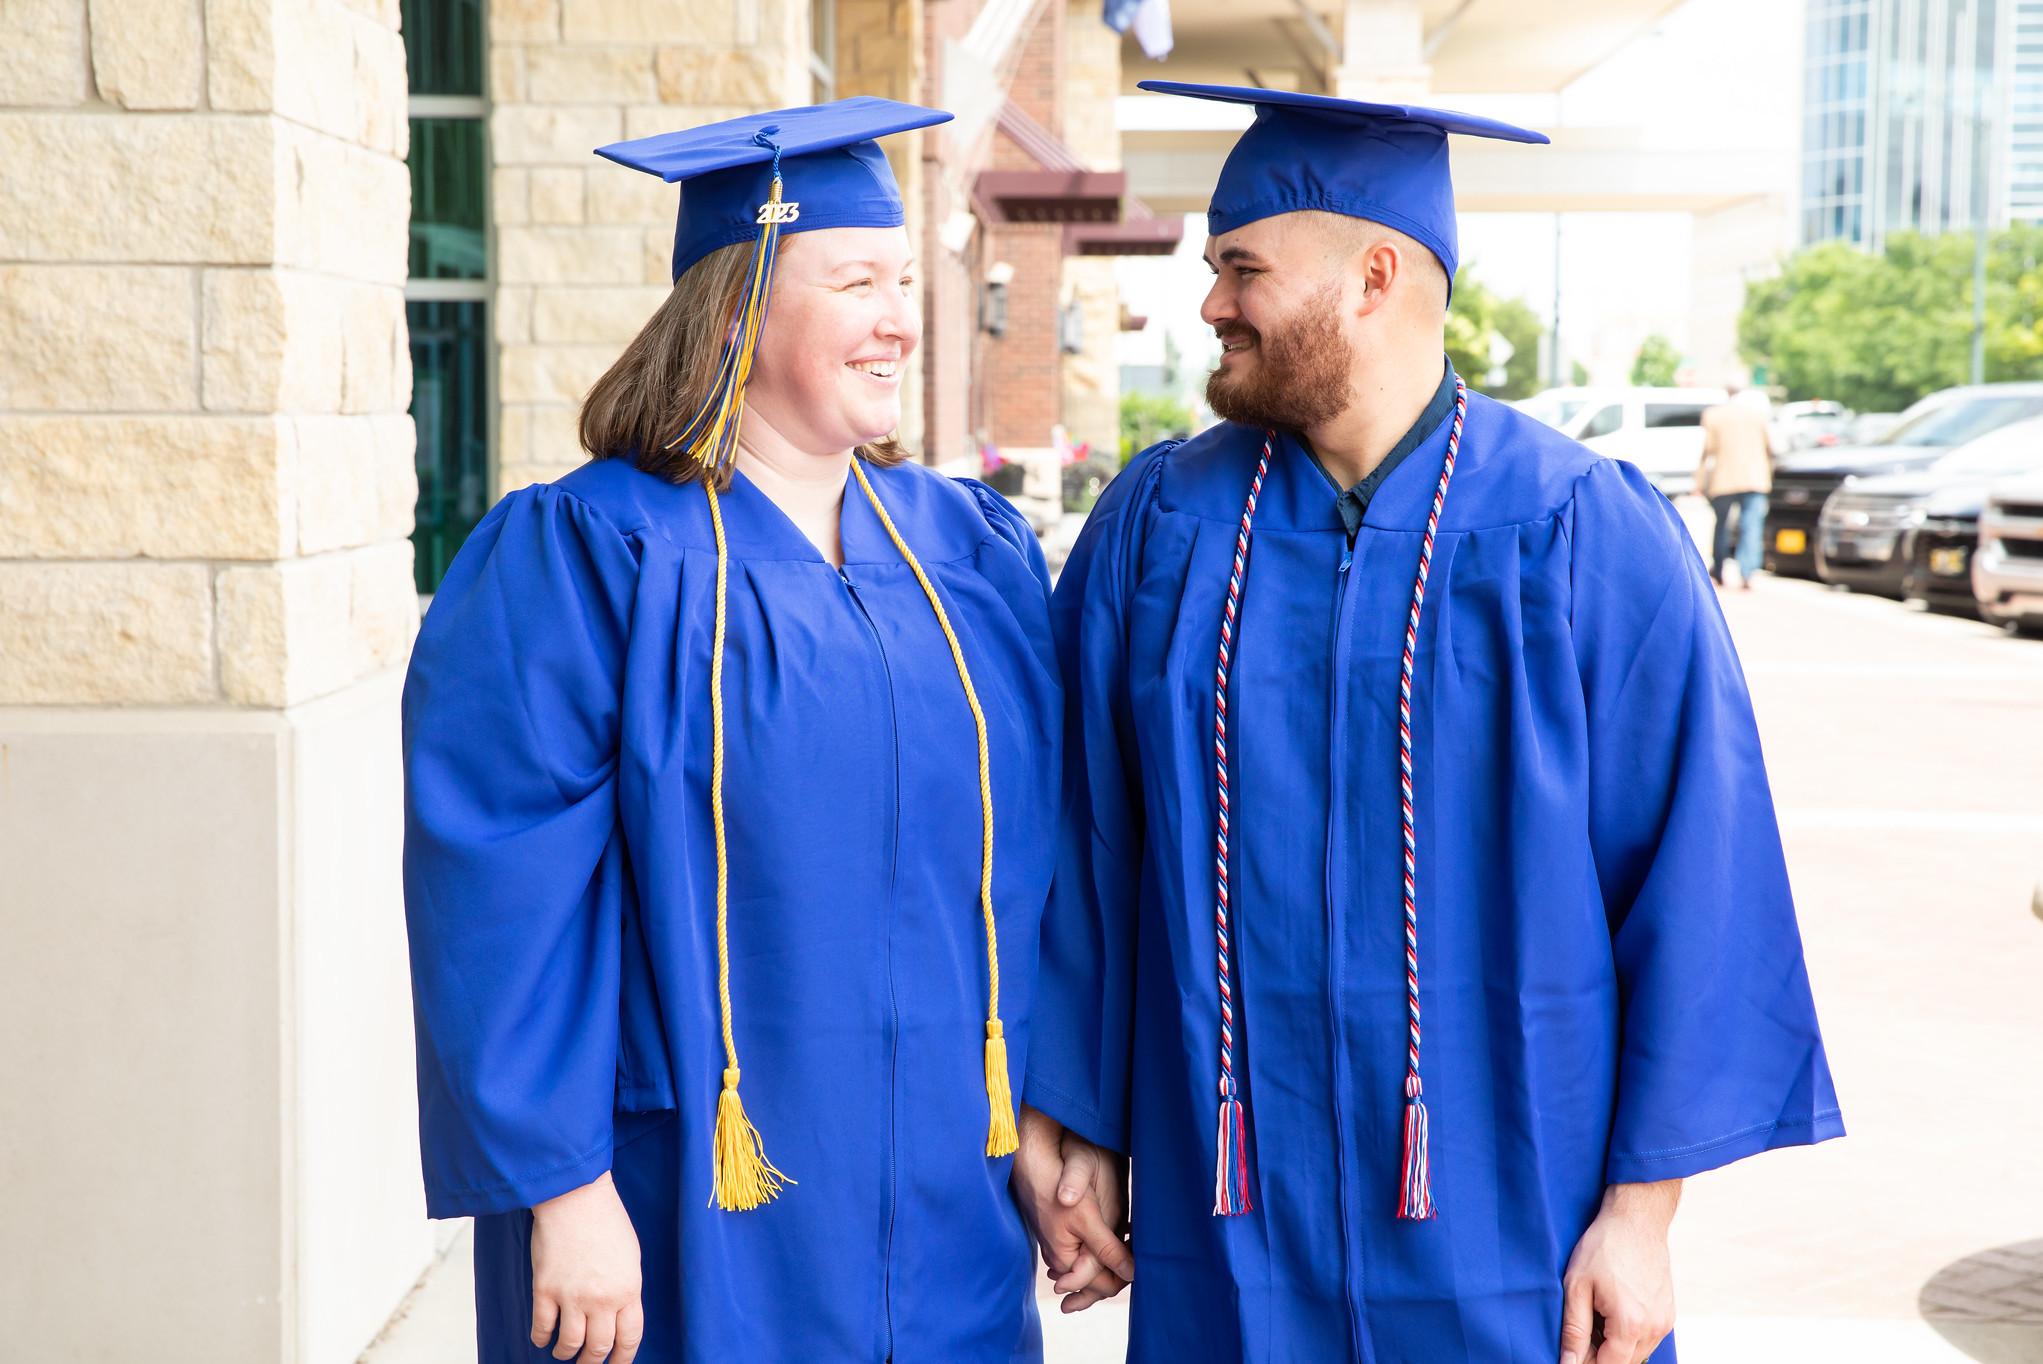 two graduates in caps and gowns smiling and looking at each other while holding hands